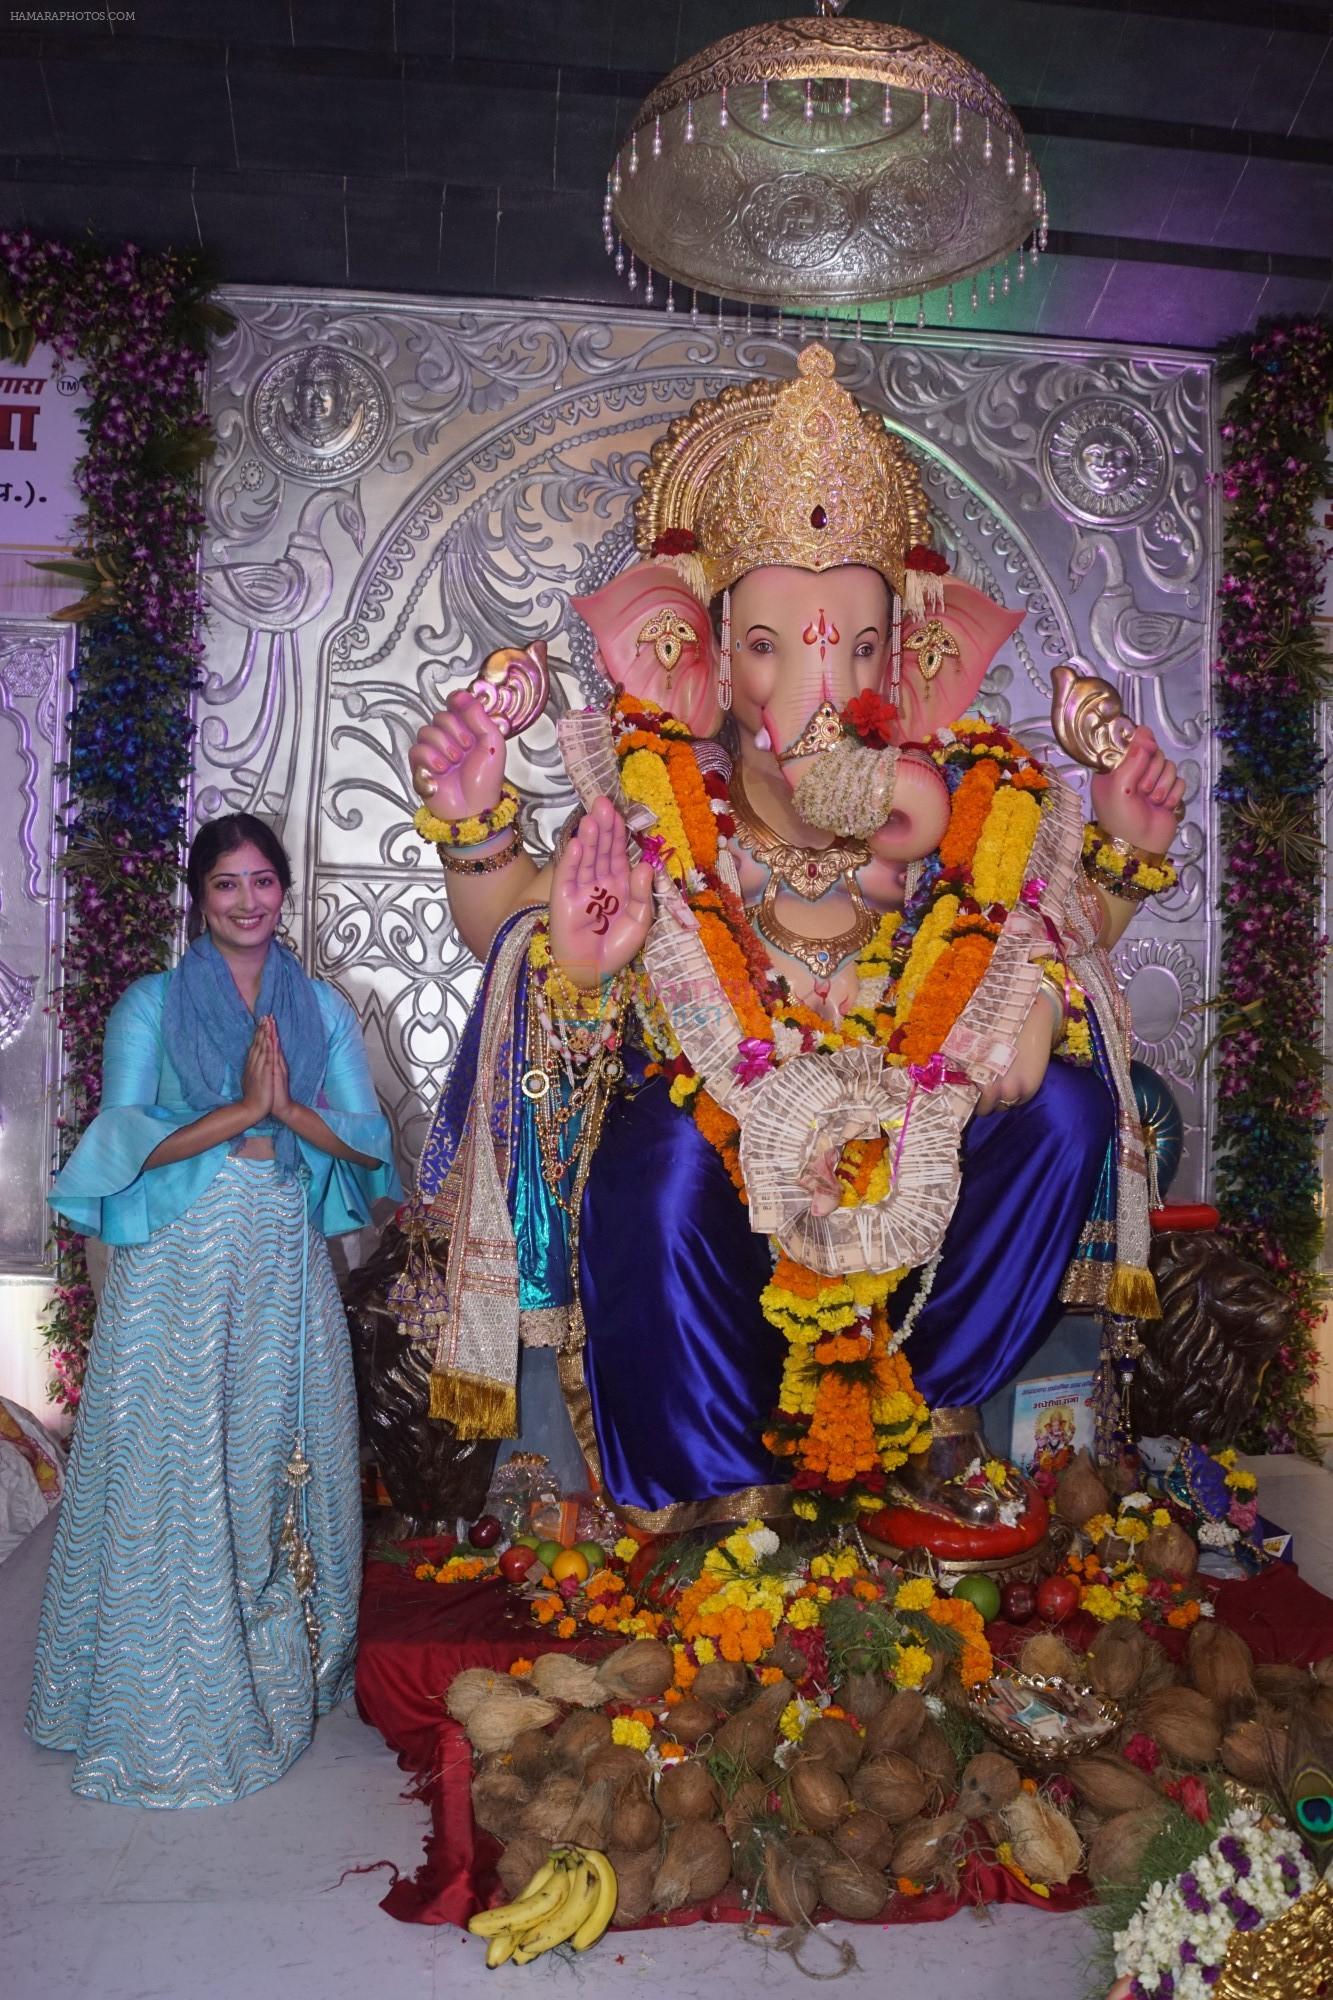 Niharica Raizada Visited Andheri Cha Raja to Receive Bappa's blessing for her upcoming Project on 20th Sept 2018